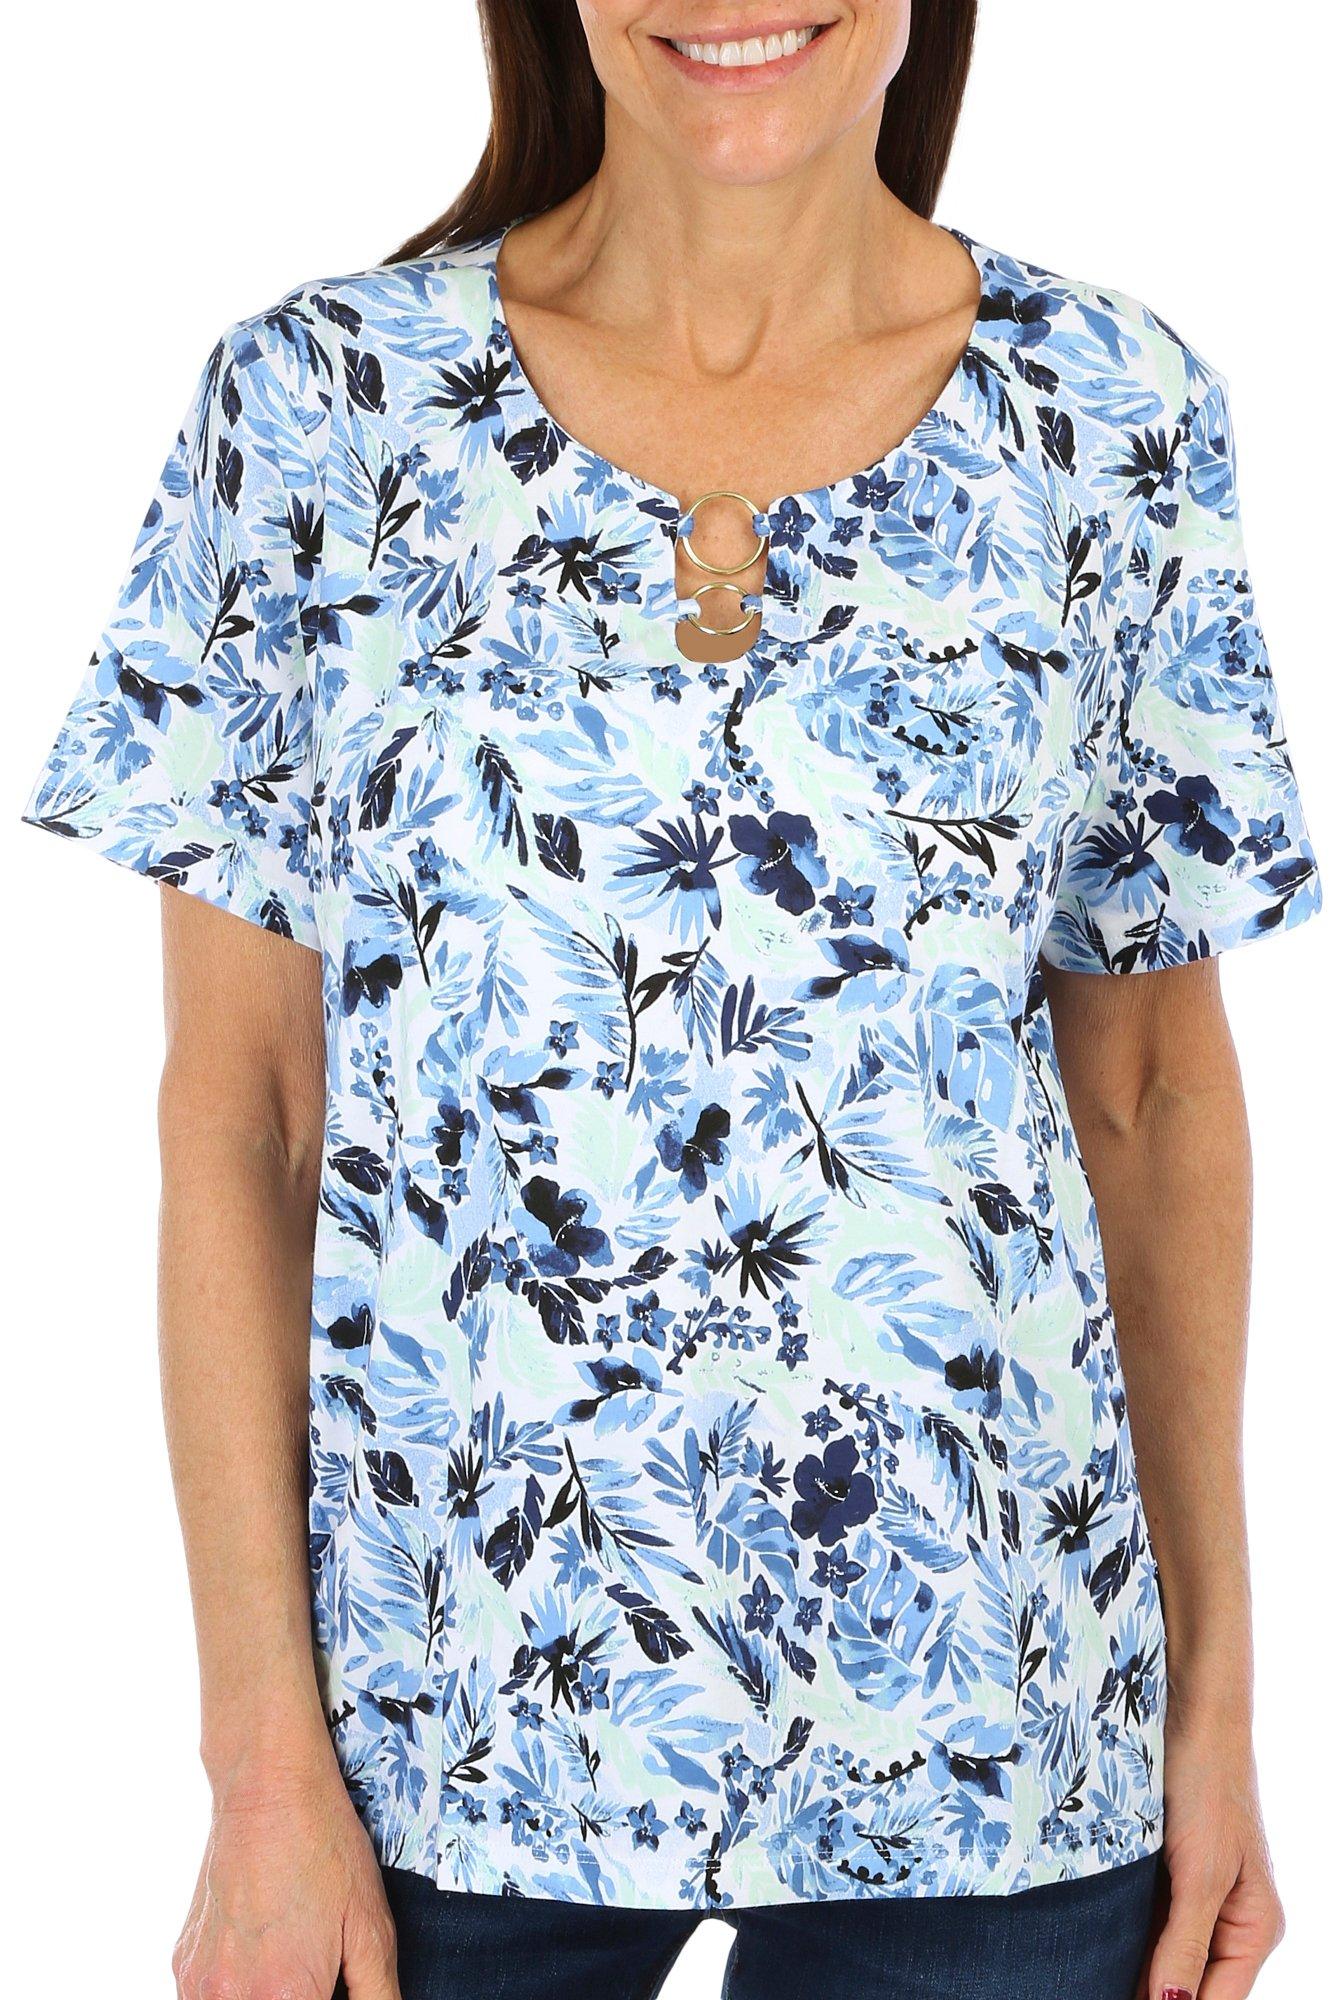 Coral Bay Petite Floral O-Ring Keyhole Short Sleeve Top